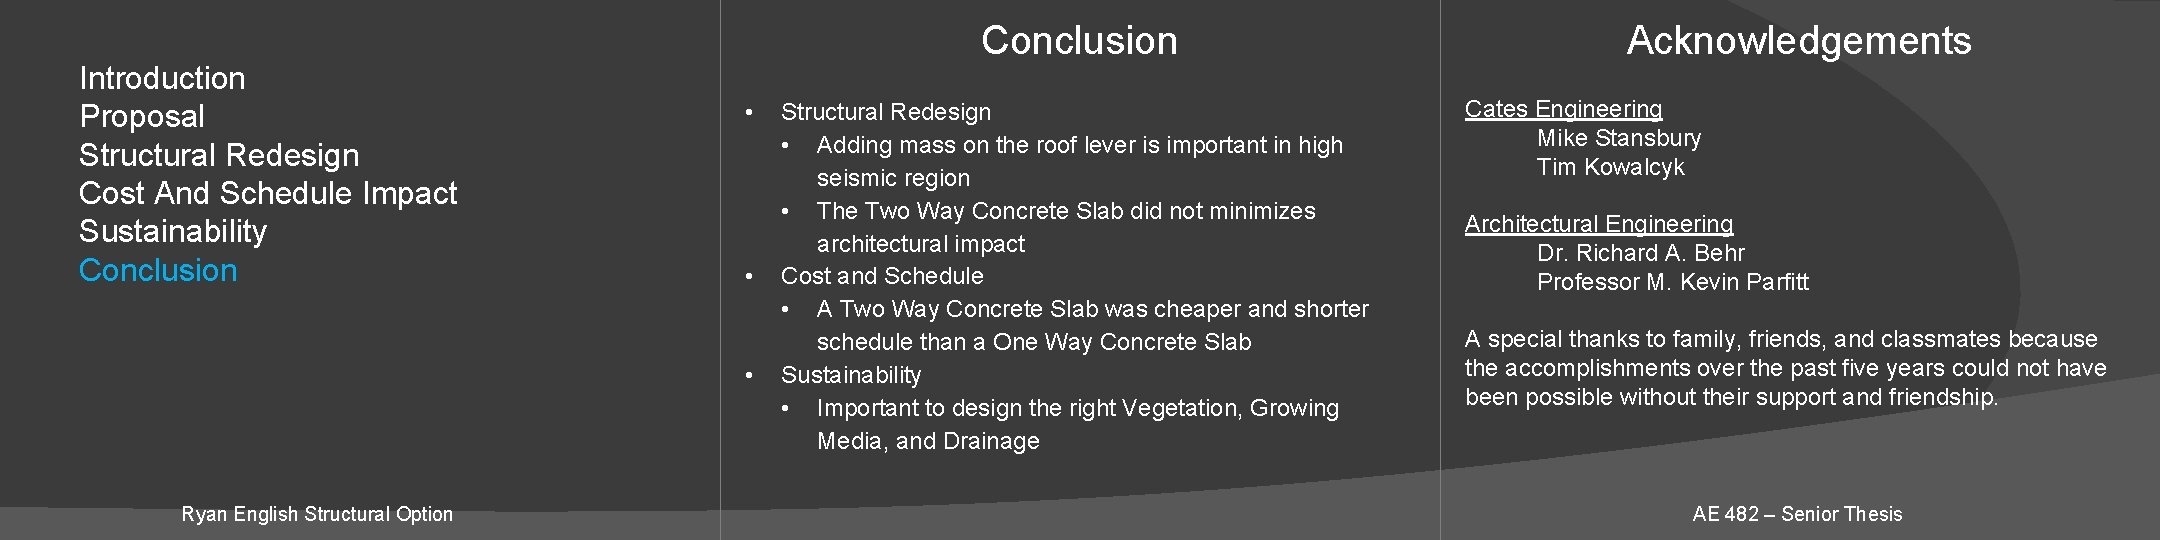 Introduction Proposal Structural Redesign Cost And Schedule Impact Sustainability Conclusion • • • Ryan